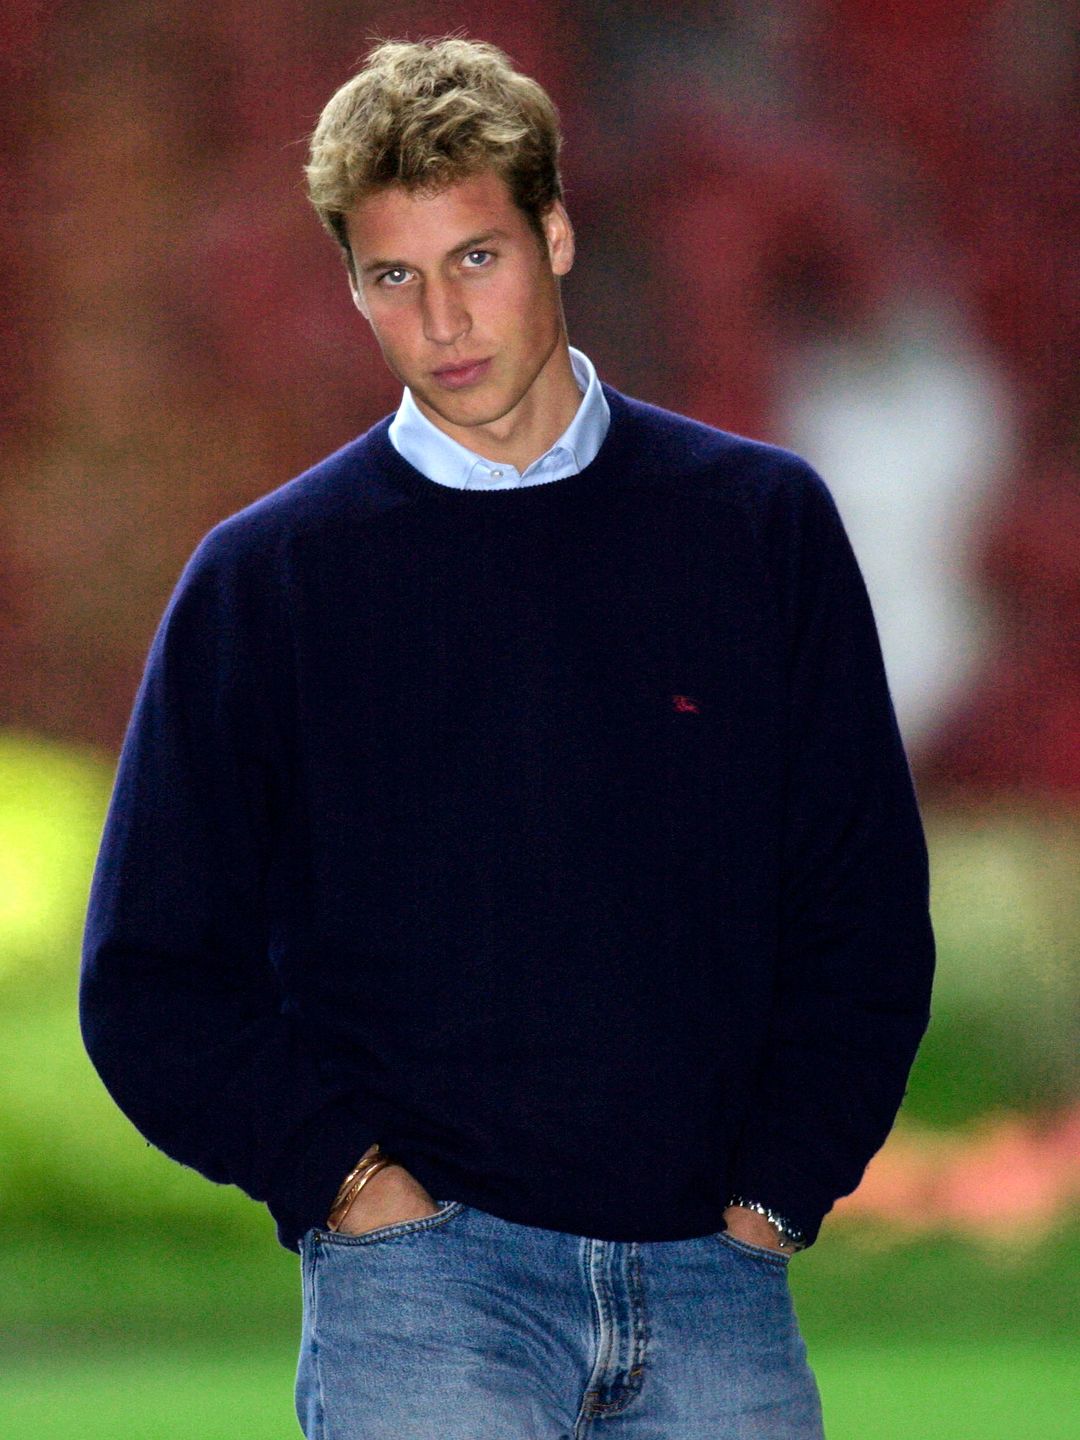 Prince William, Dressed Casually Jeans And A Blue Jumper, Arriving For His First Day At St Andrews University In Scotland. 